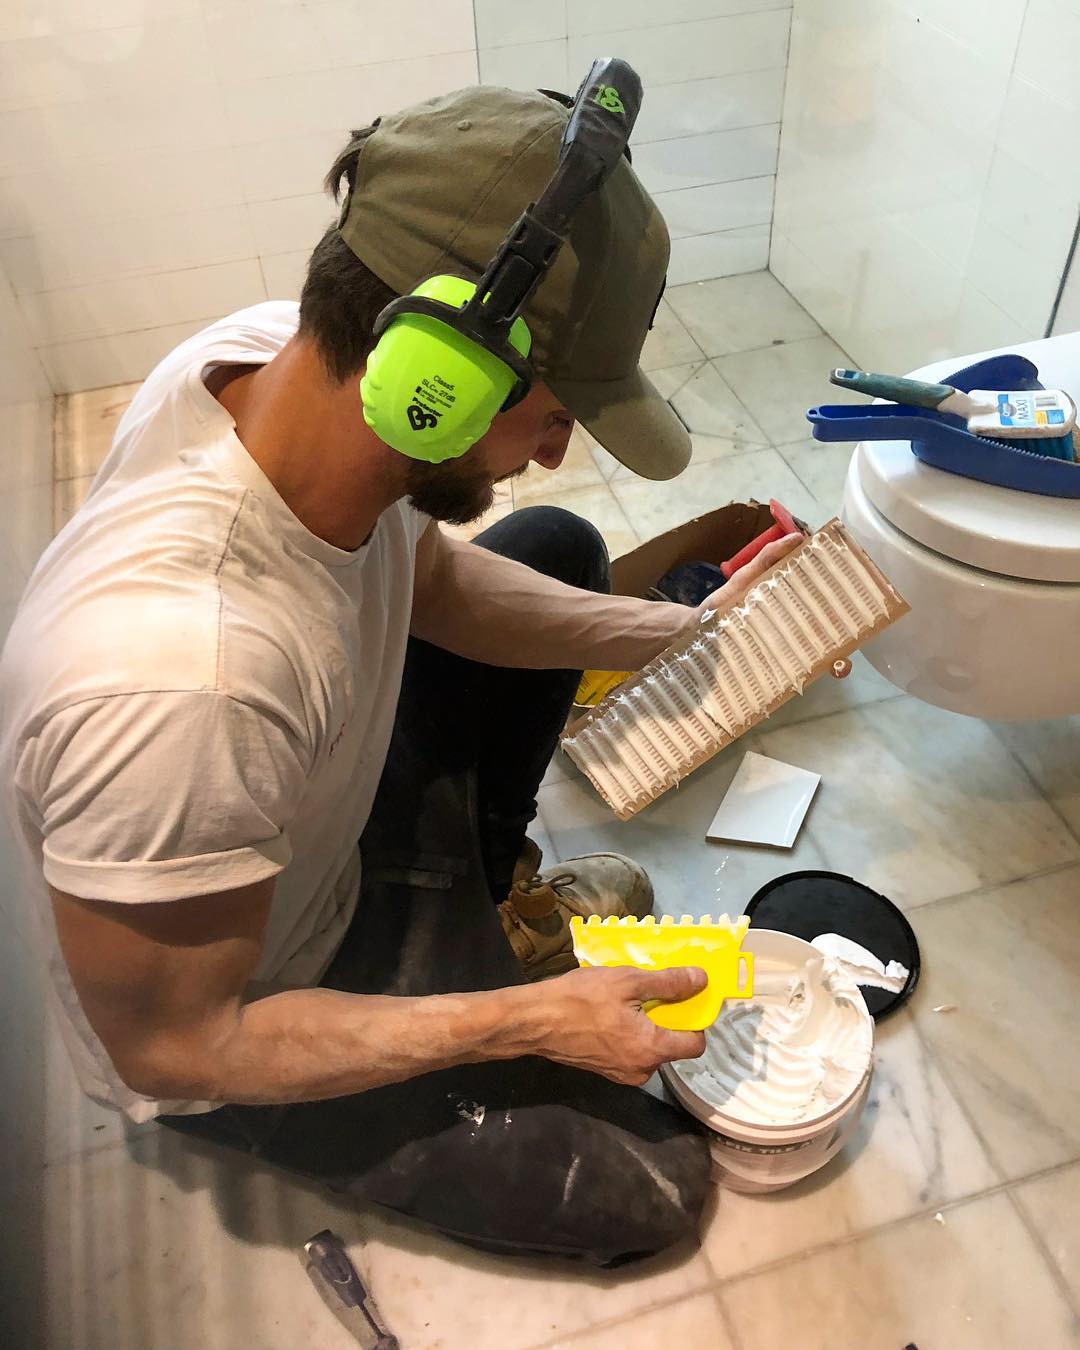 A worker of Pro Projects adding glue to tiles in a bathroom in Randwick, NSW 2031